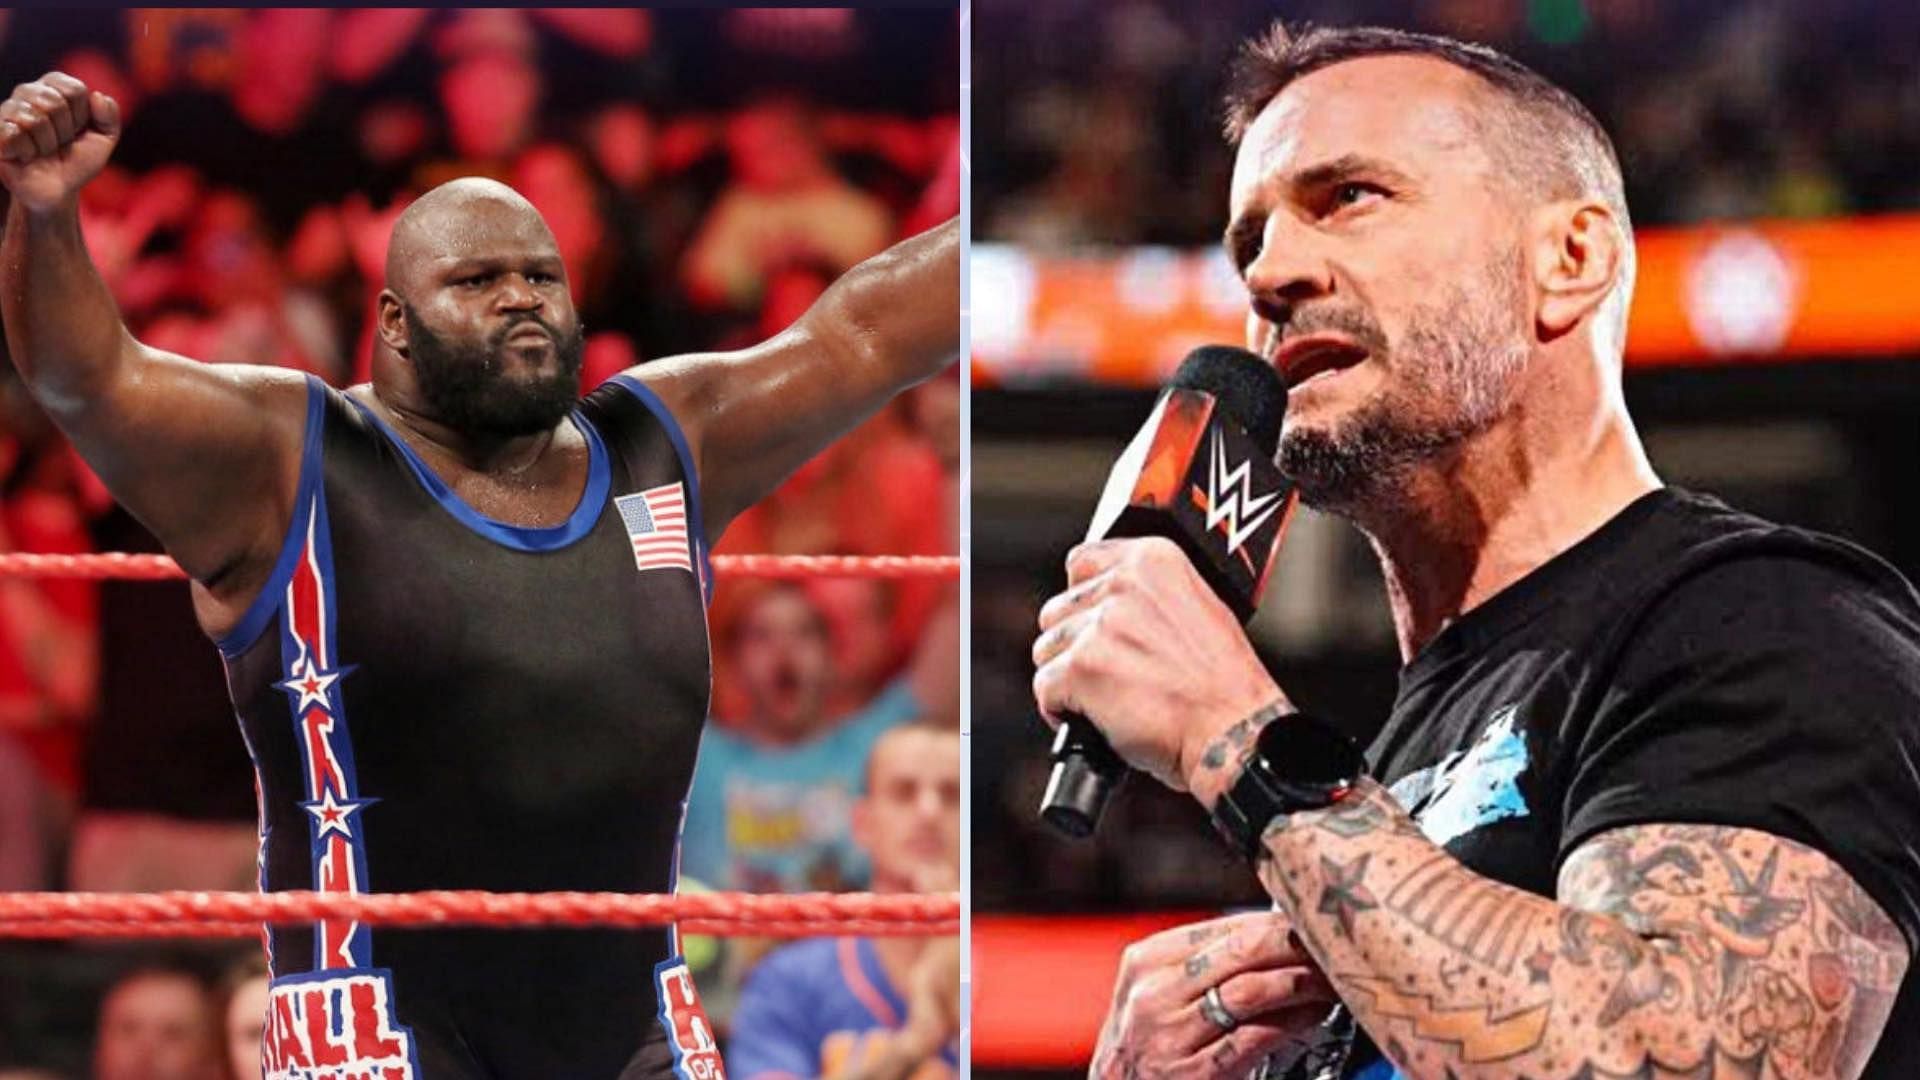 Mark Henry comments on CM Punk